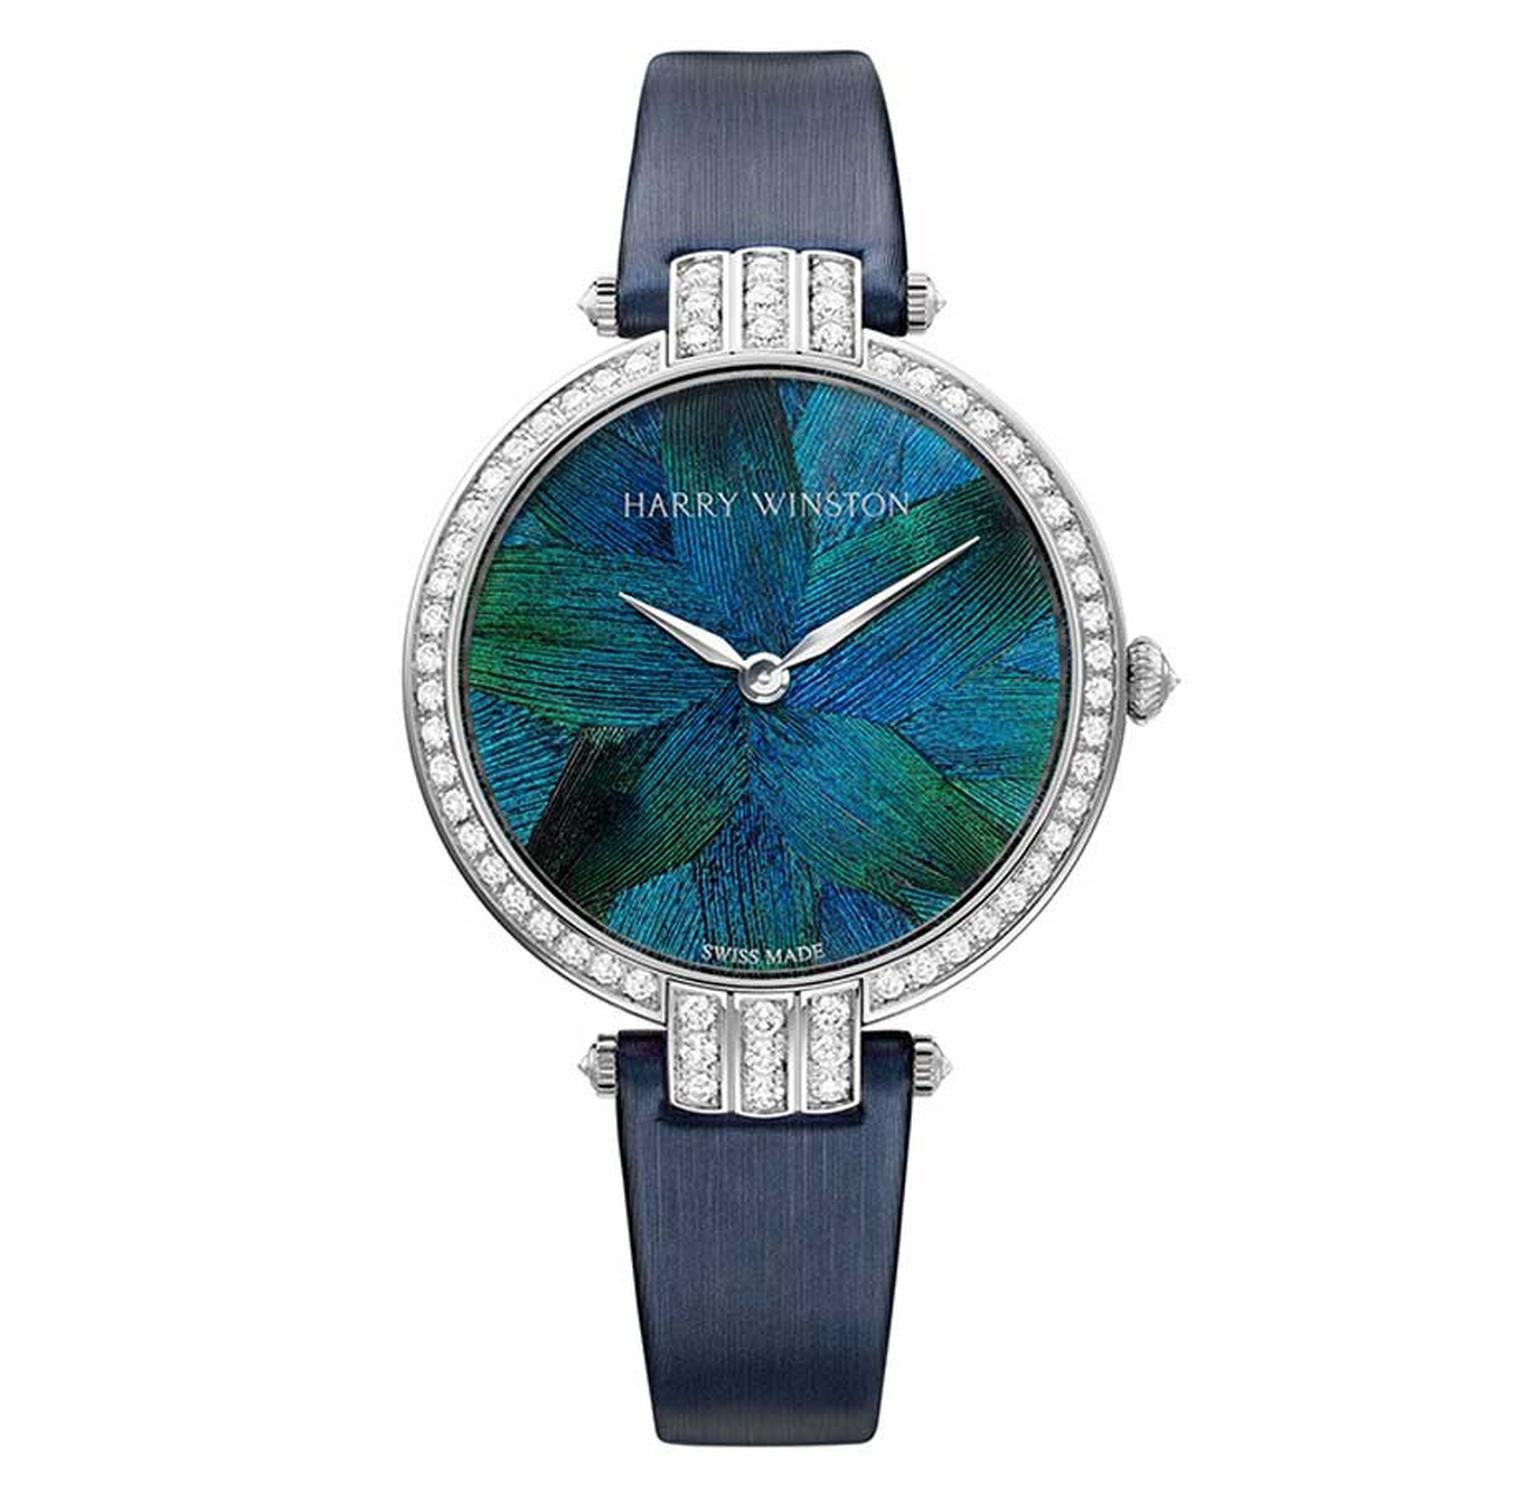 Harry Winston Premier Collection with marquetry of peacock feathers housed in a 36mm white gold case with 96 brilliant-cut diamonds on the bezel, crown, lugs and buckle.